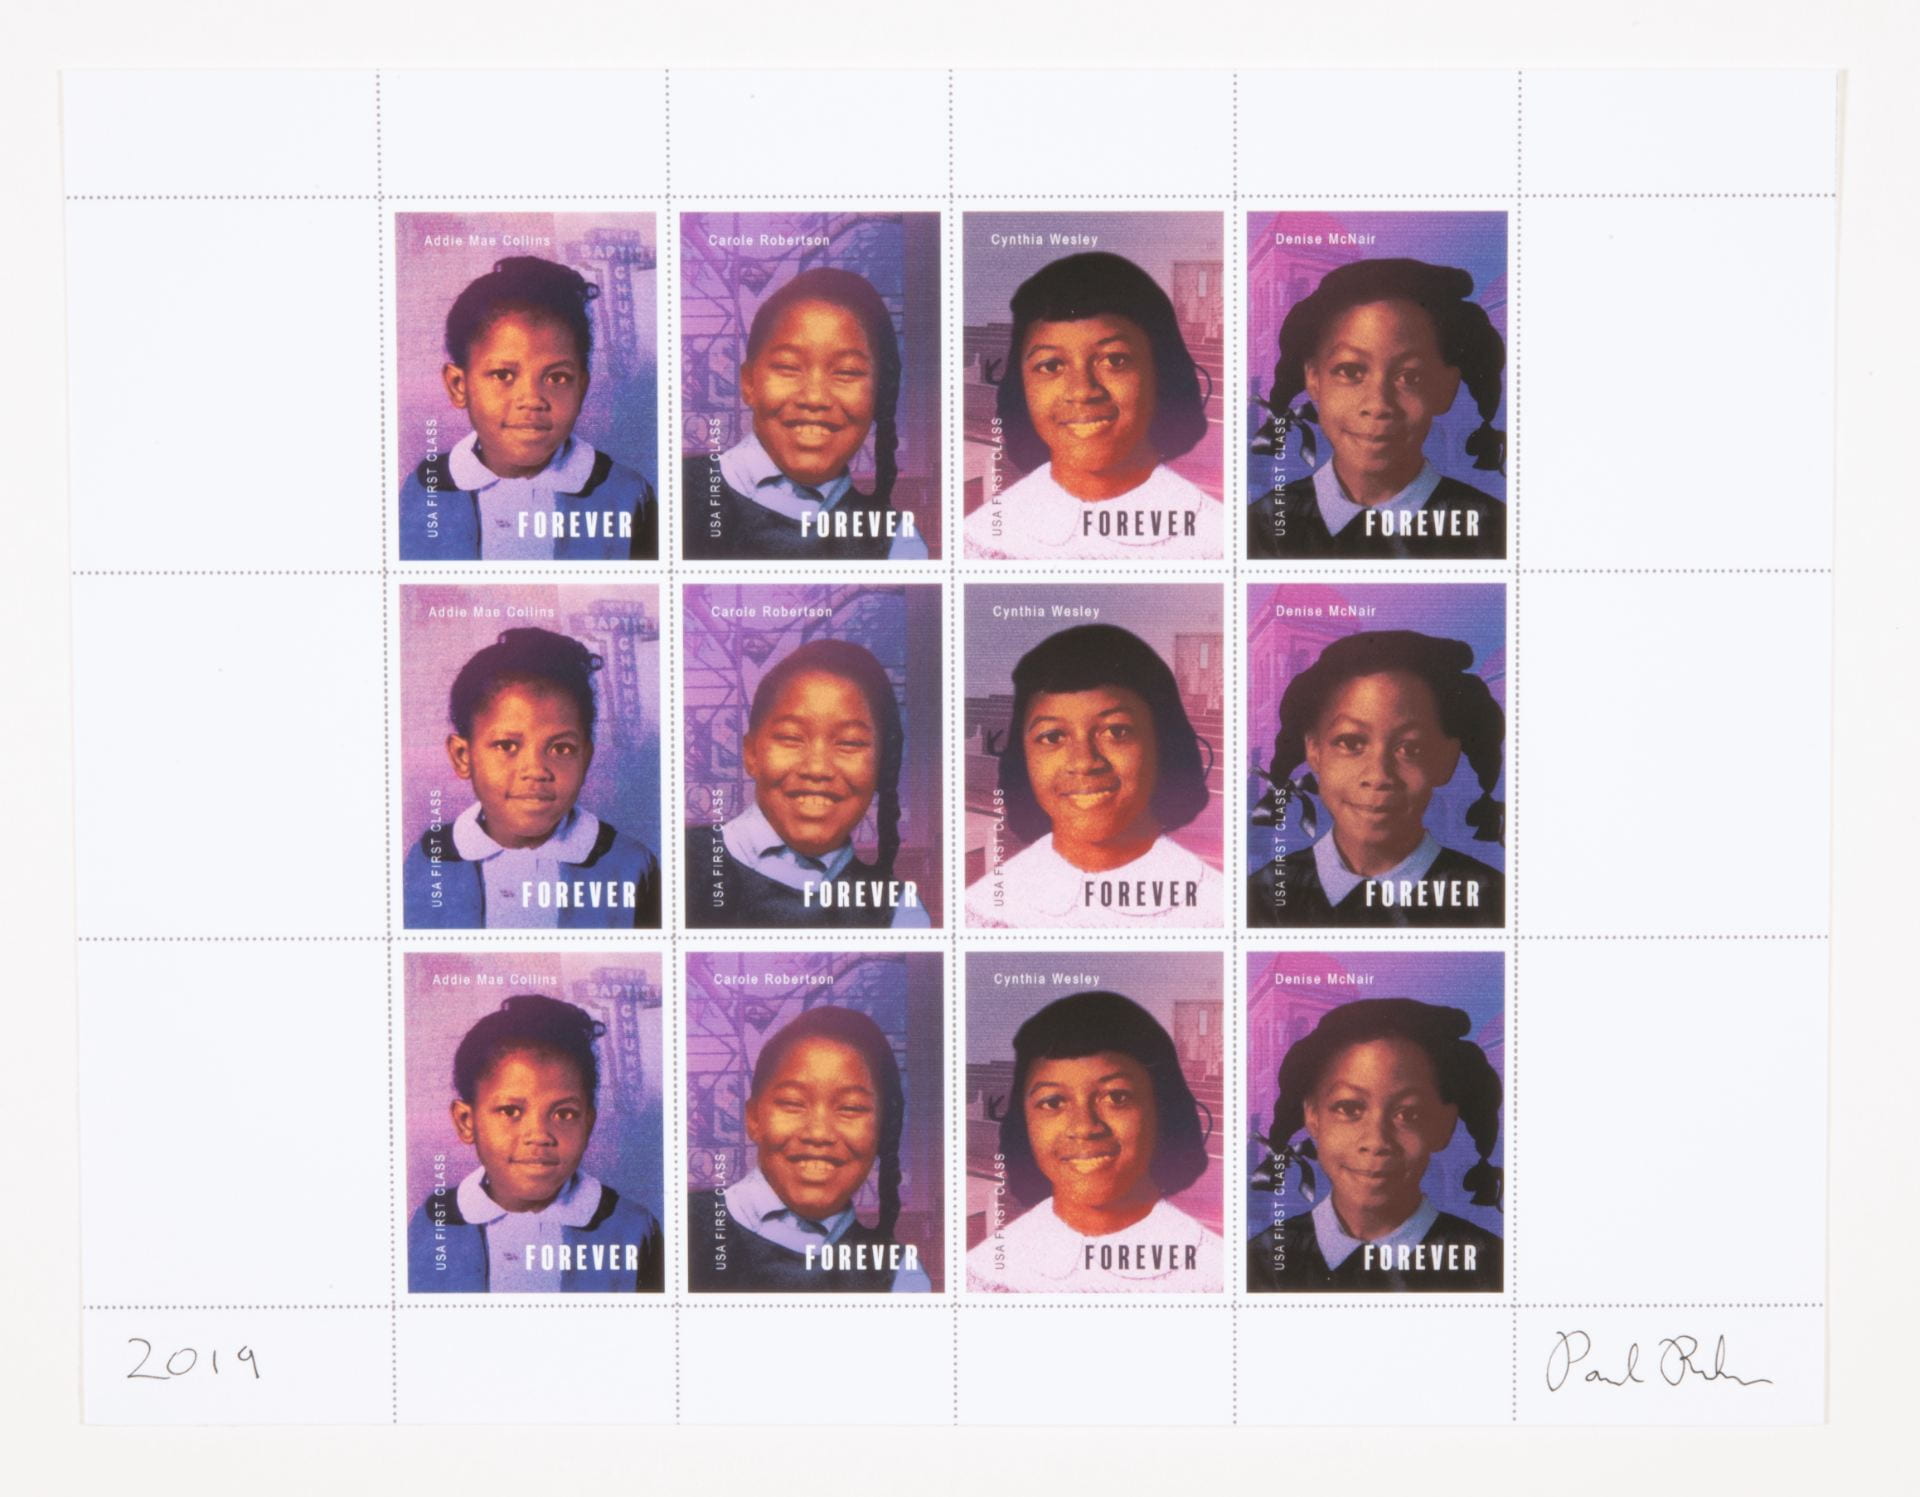 12 stamp cells with images of 4 young girls